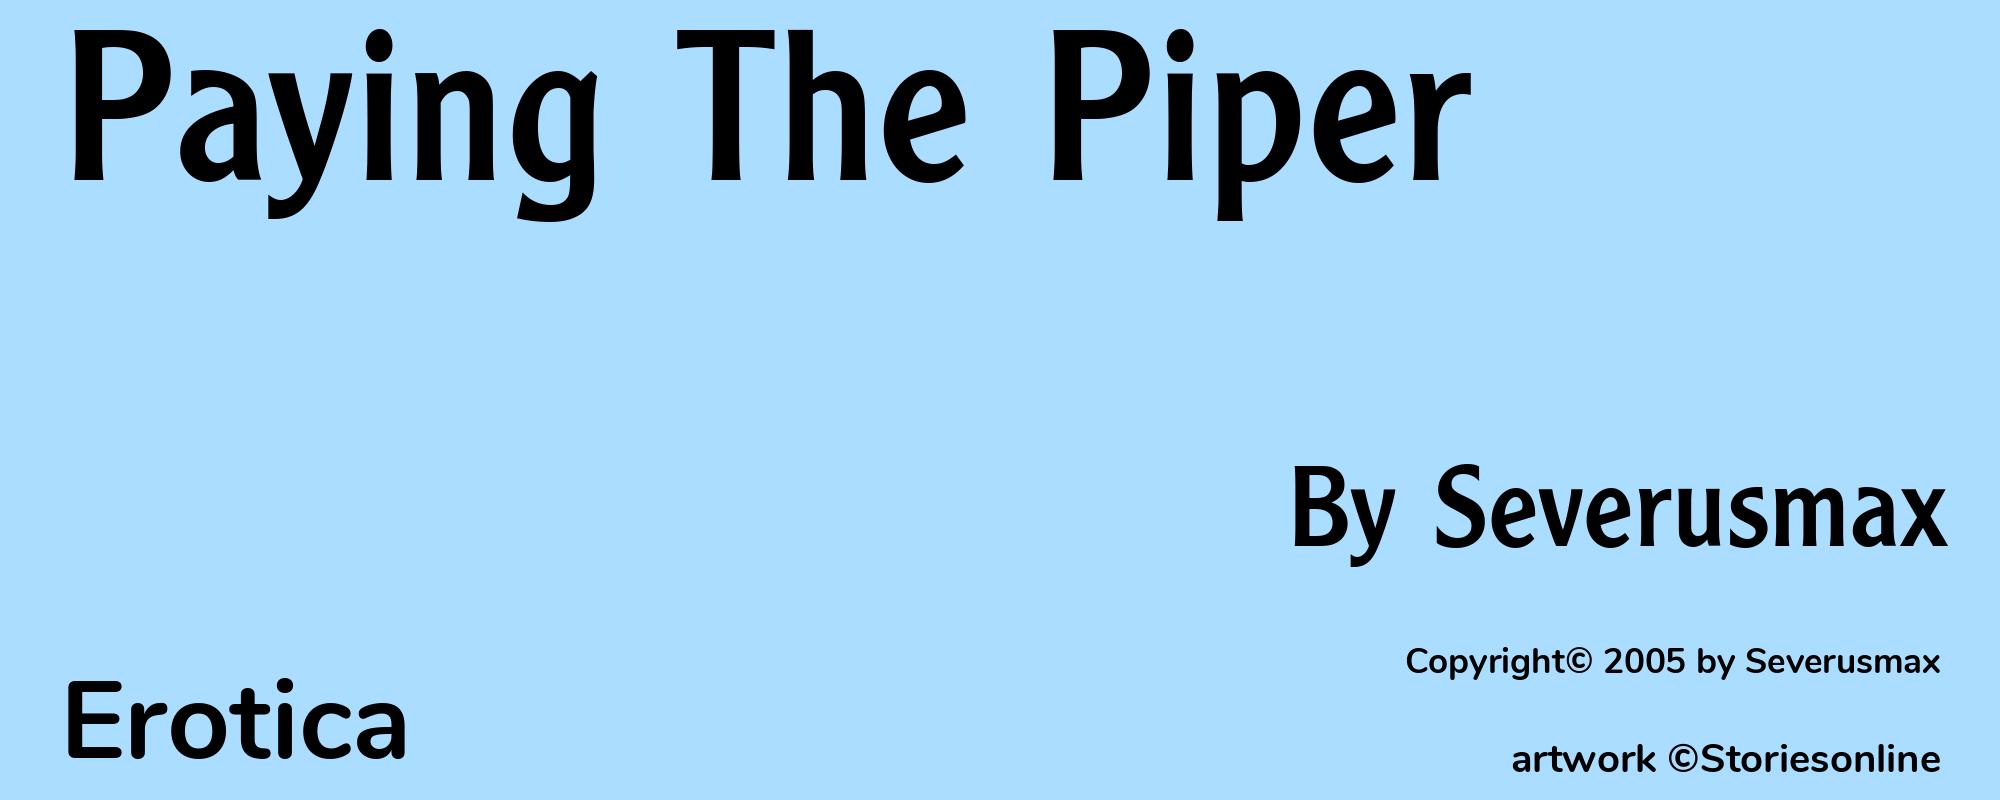 Paying The Piper - Cover